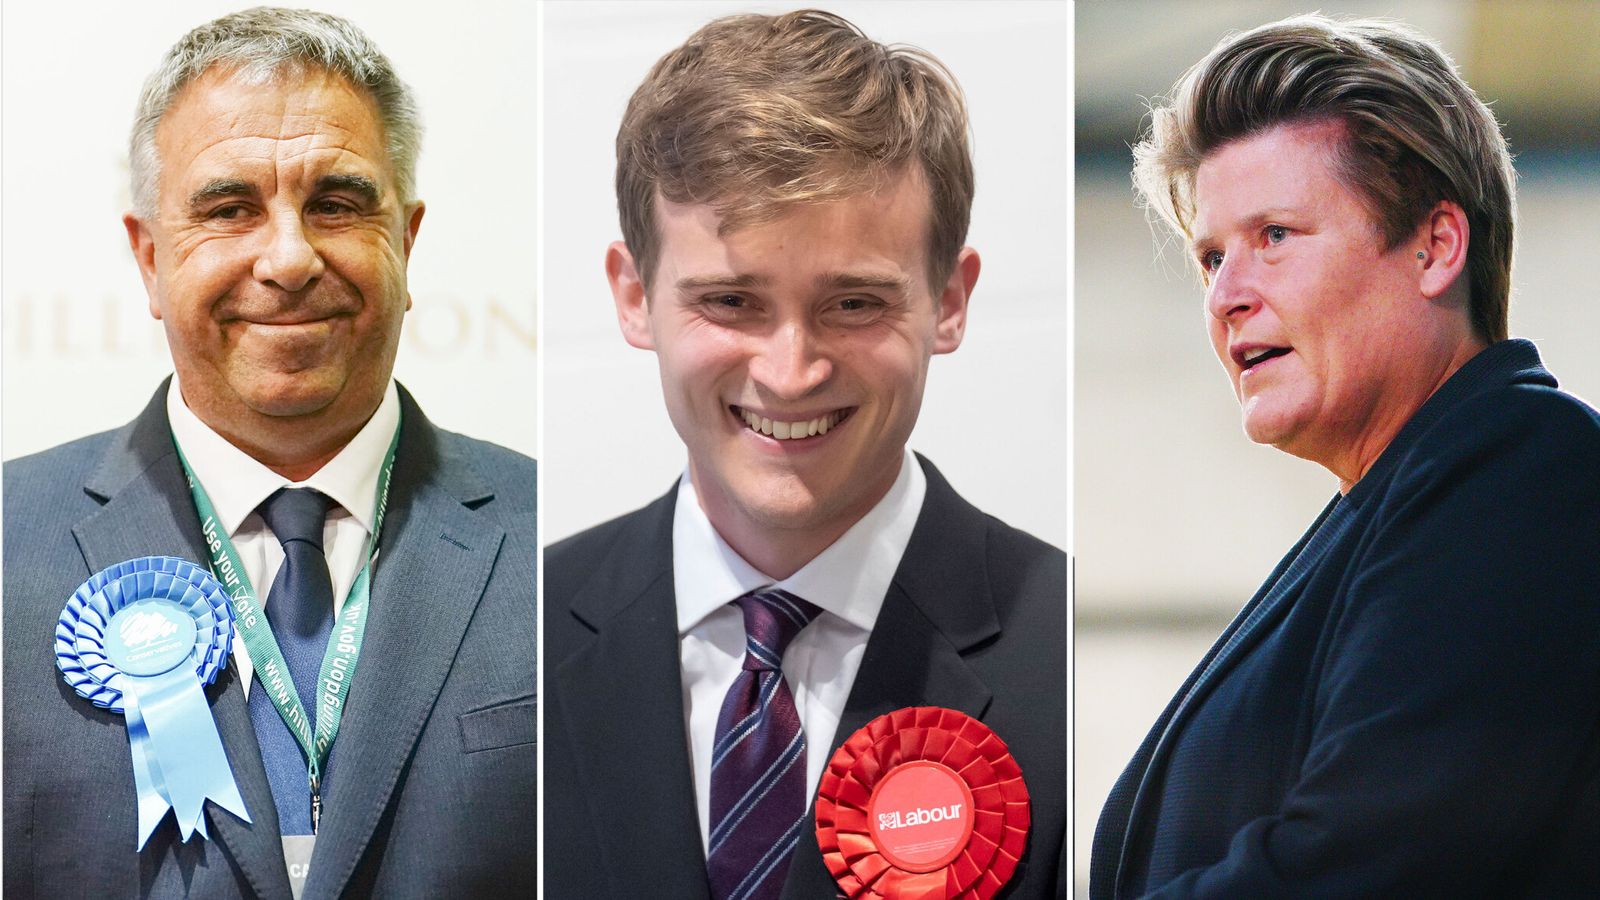 By-election results: Who are the new MPs in Uxbridge and South Ruislip, Selby and Ainsty, and Somerton and Frome?